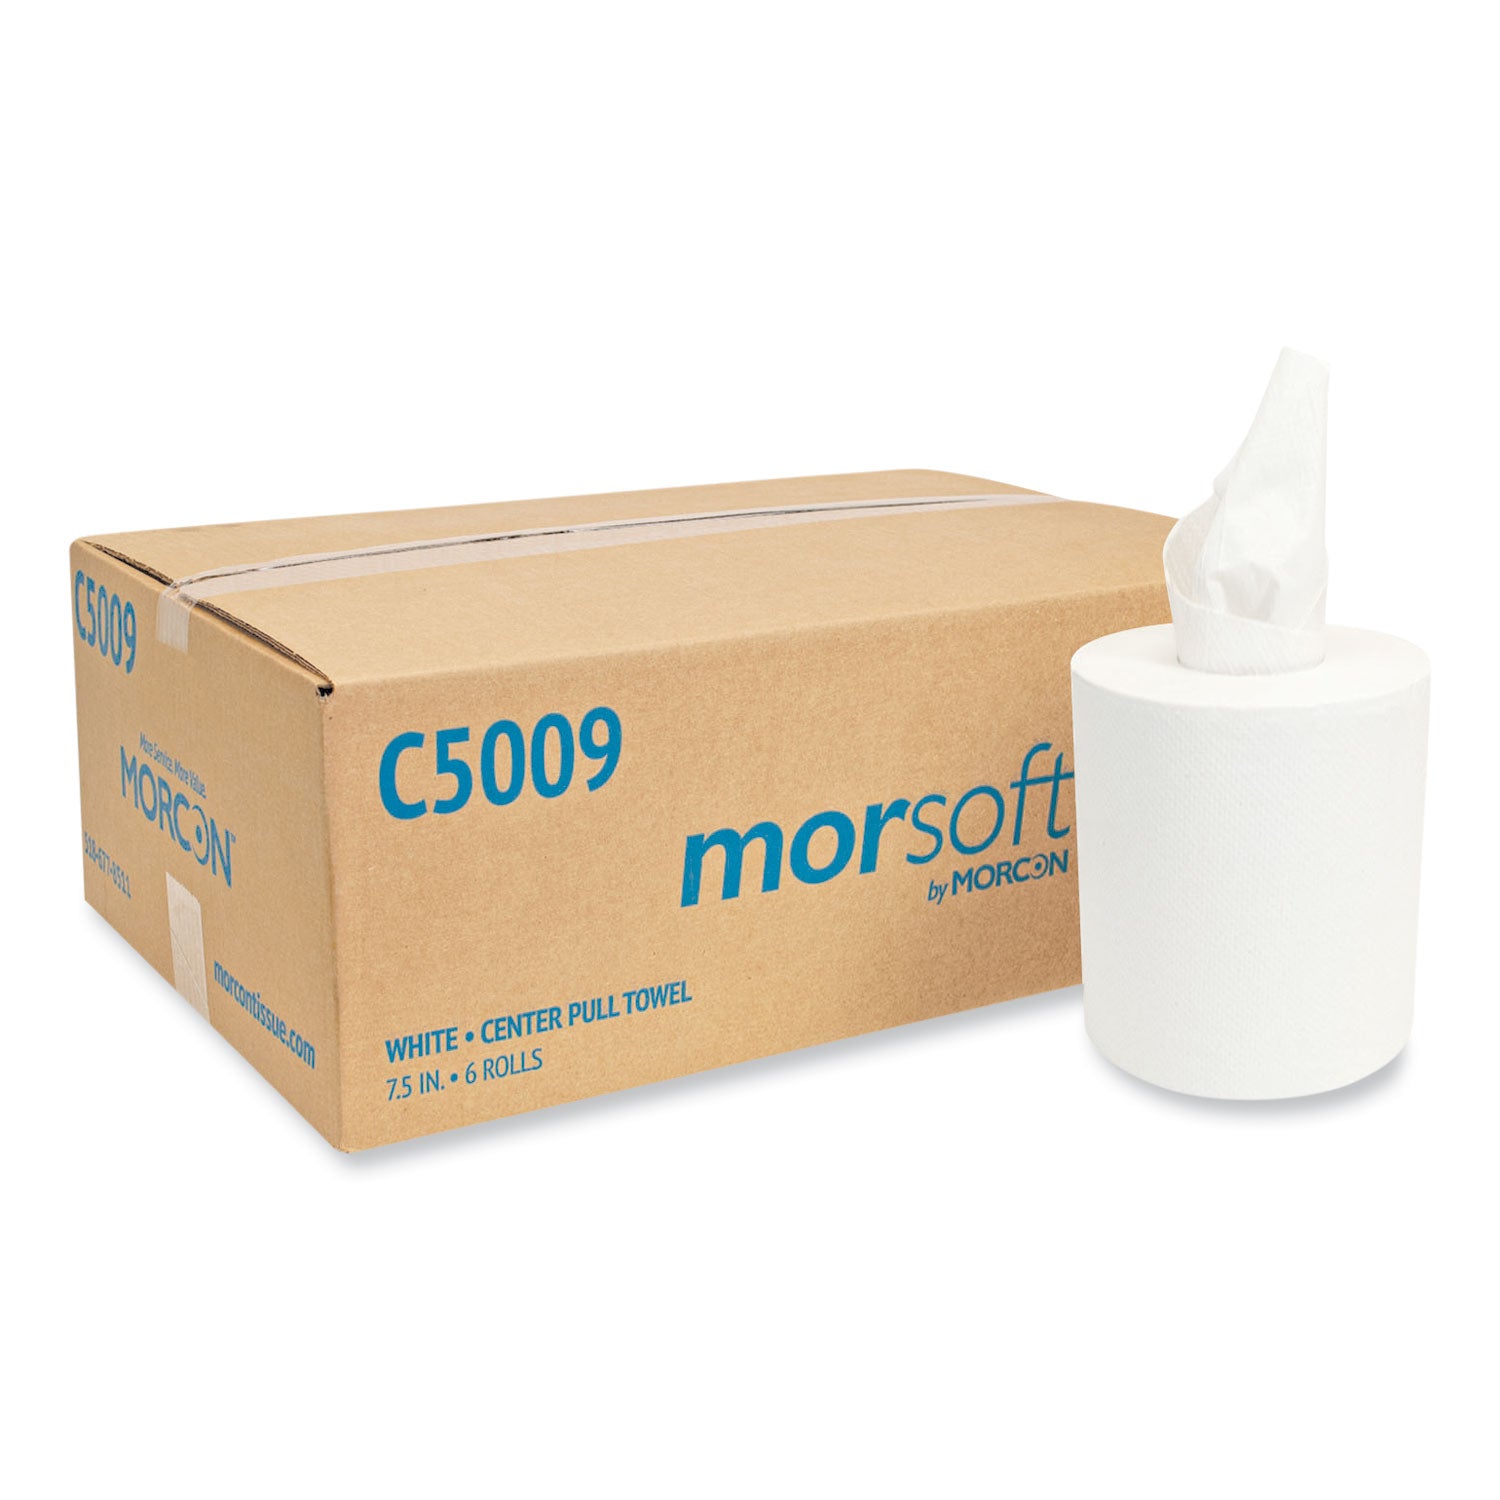 morsoft-center-pull-roll-towels-2-ply-69-dia-500-sheets-roll-6-rolls-carton_morc5009 - 1